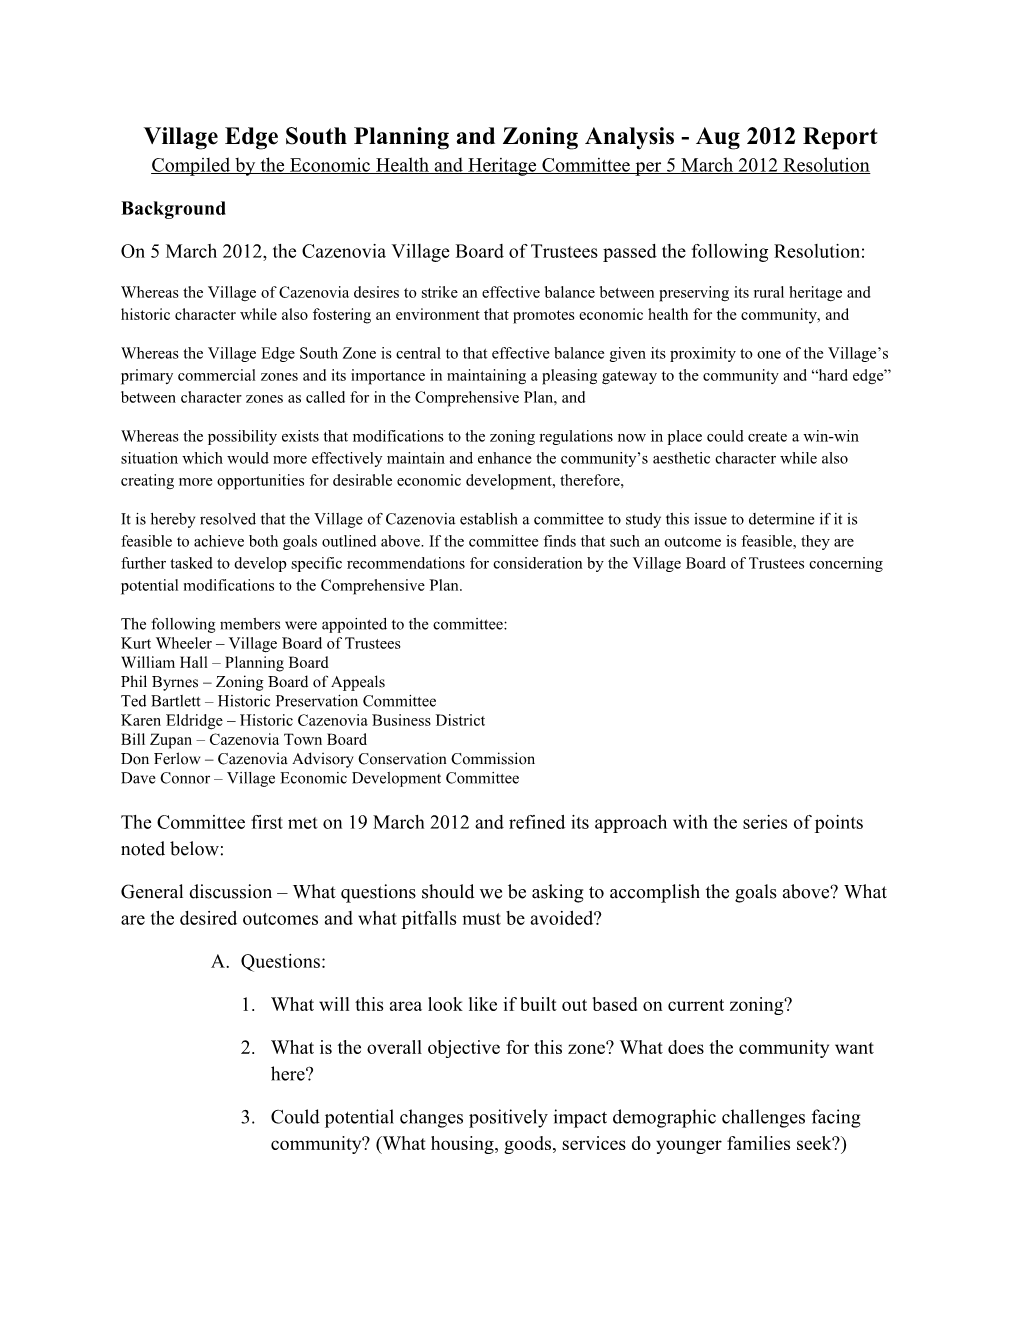 On 5 March 2012, the Cazenovia Village Board of Trustees Passed the Following Resolution